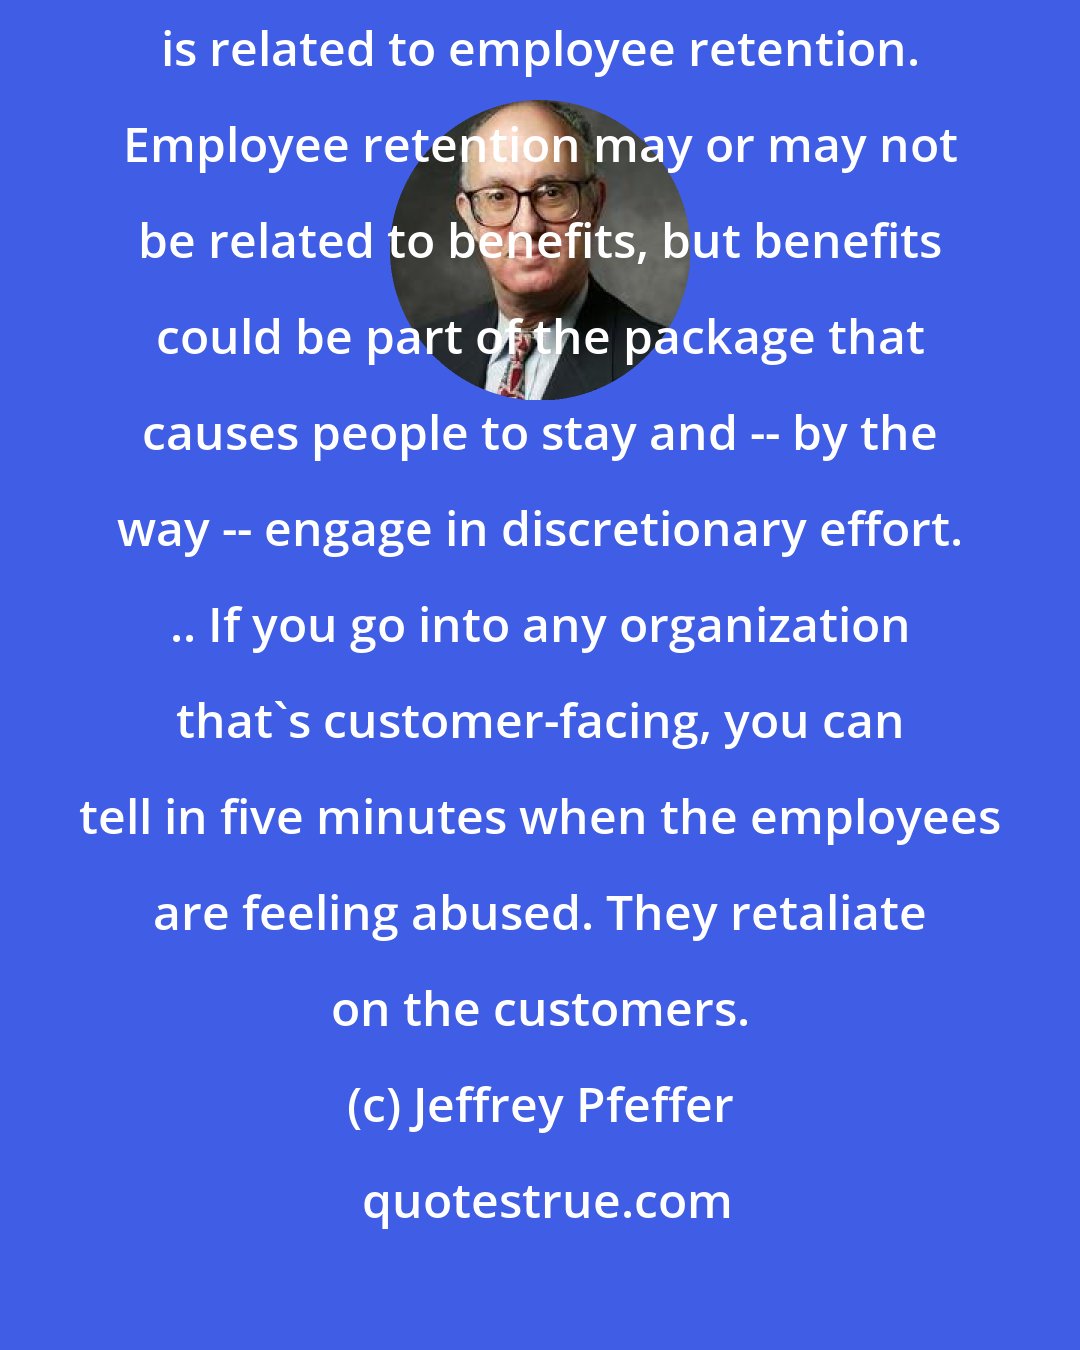 Jeffrey Pfeffer: Profits are related to customer retention. Customer retention is related to employee retention. Employee retention may or may not be related to benefits, but benefits could be part of the package that causes people to stay and -- by the way -- engage in discretionary effort. .. If you go into any organization that's customer-facing, you can tell in five minutes when the employees are feeling abused. They retaliate on the customers.